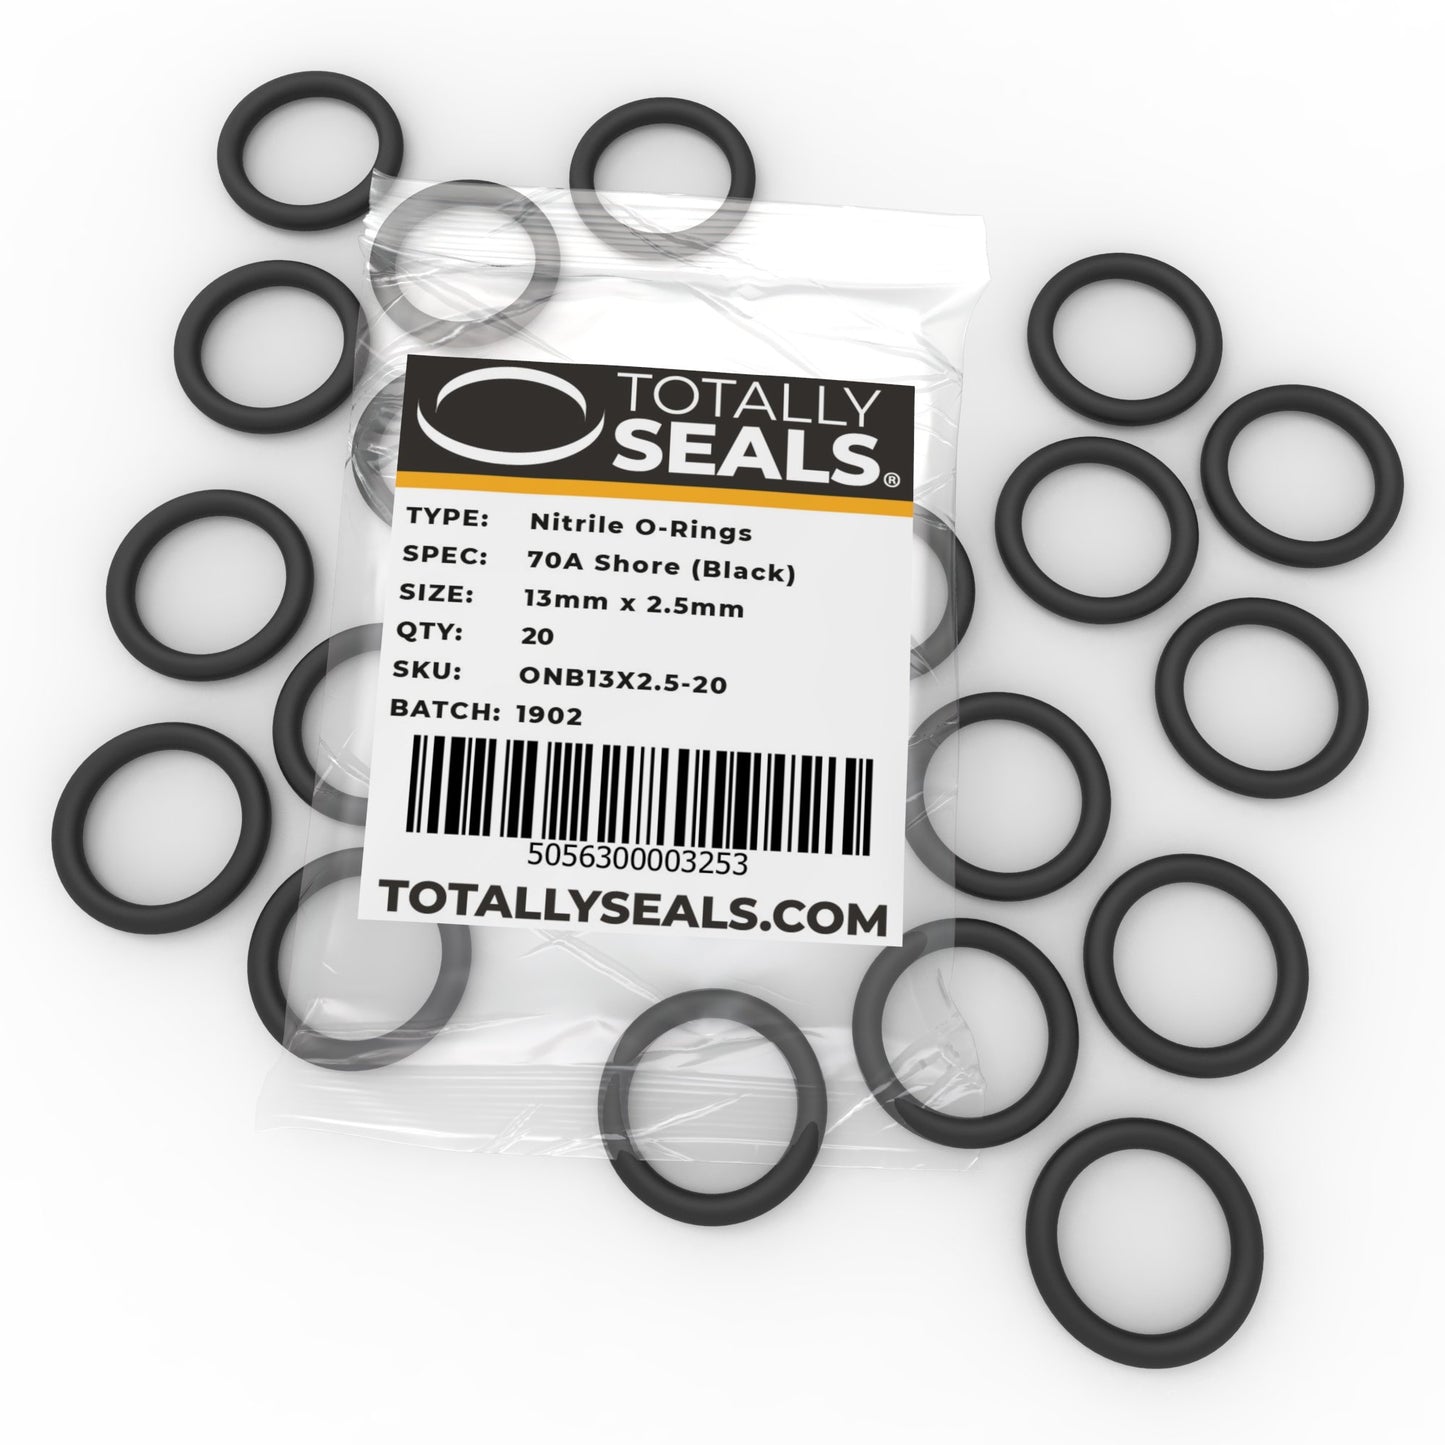 13mm x 2.5mm (18mm OD) Nitrile O-Rings - Totally Seals®